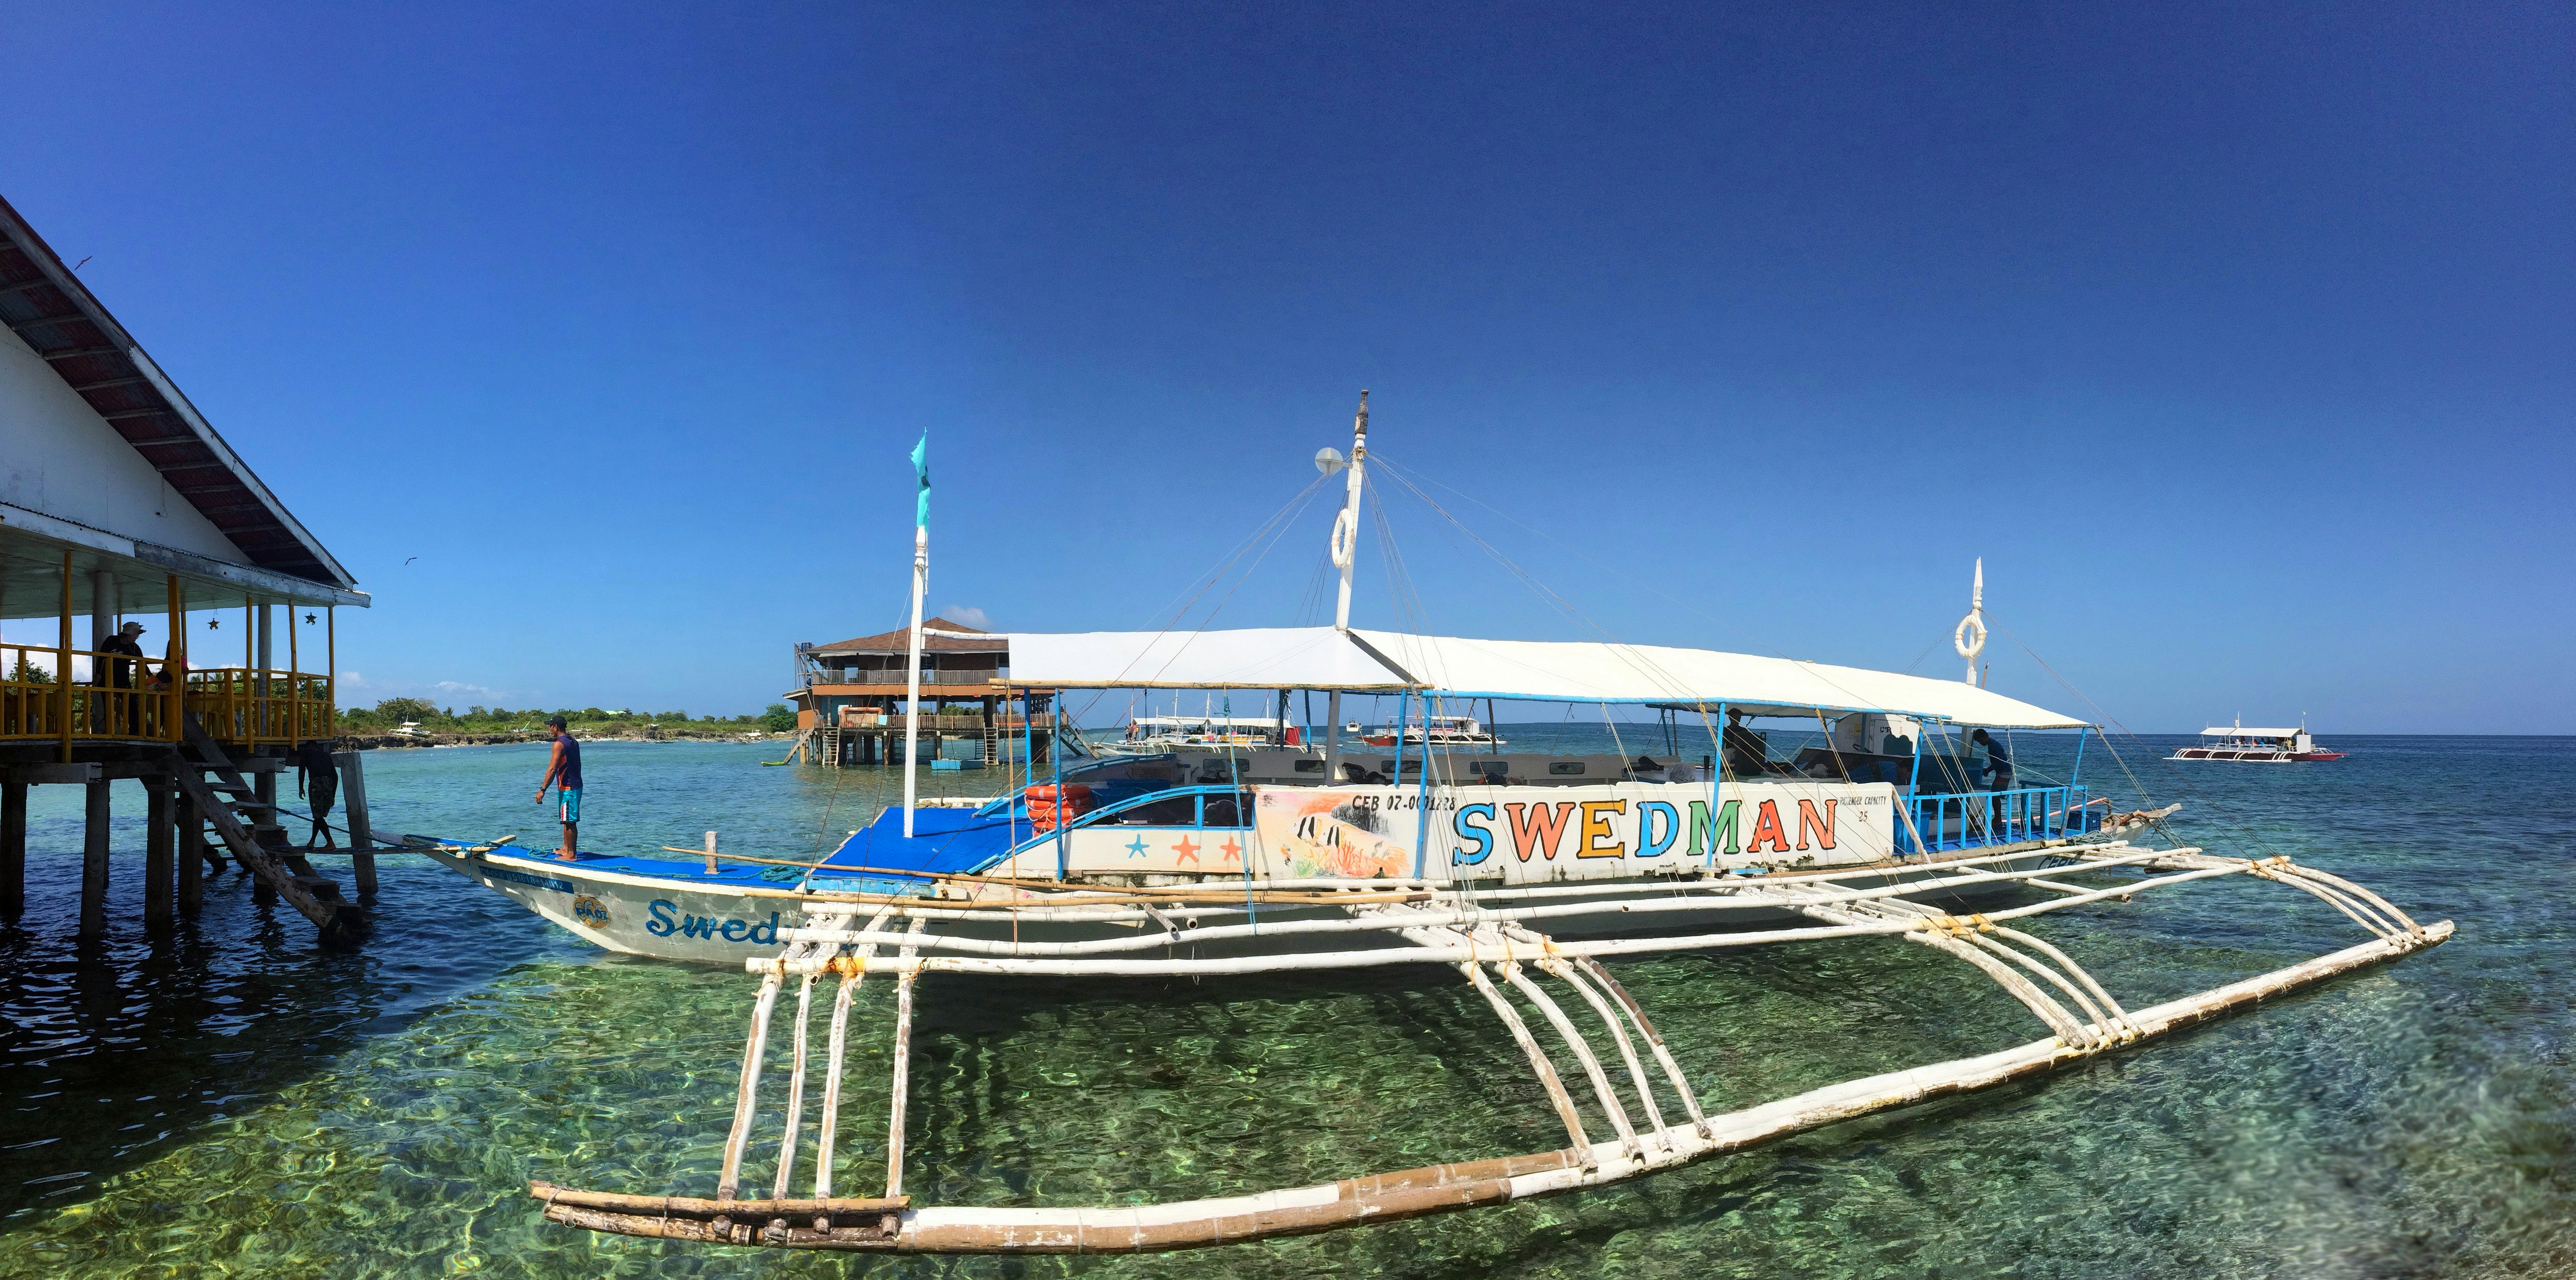 A worn white catamaran diveboat in the Philippines sits in shallow water dappled with light. In large rainbow letters on the side the name of the boat reads Swedman.